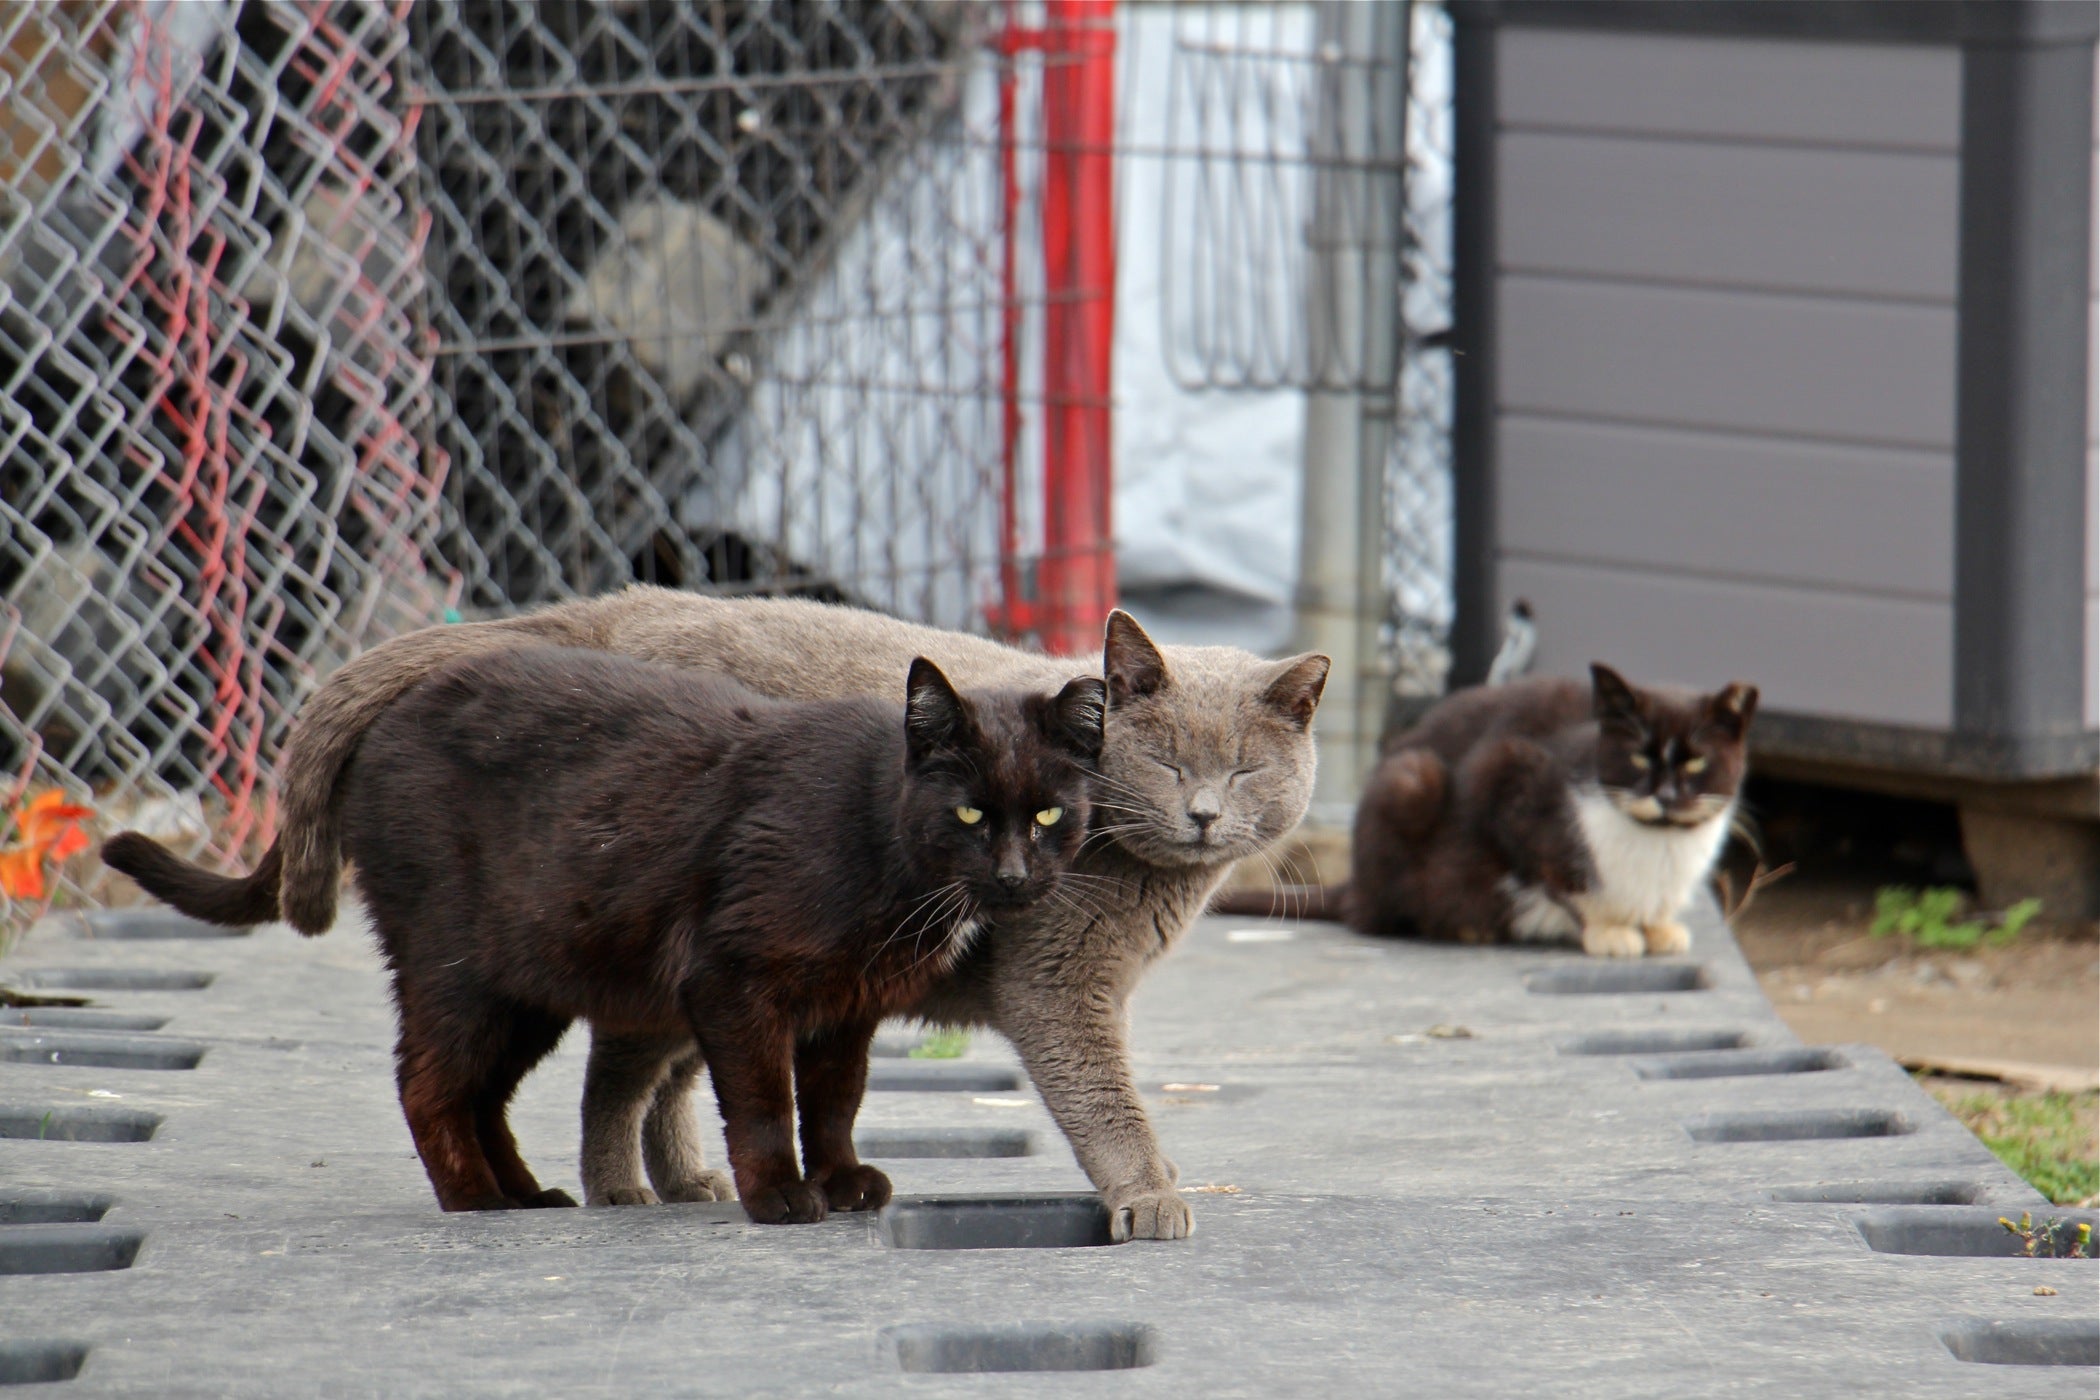 Are There Wild Cats in New Jersey? Important Safety Facts